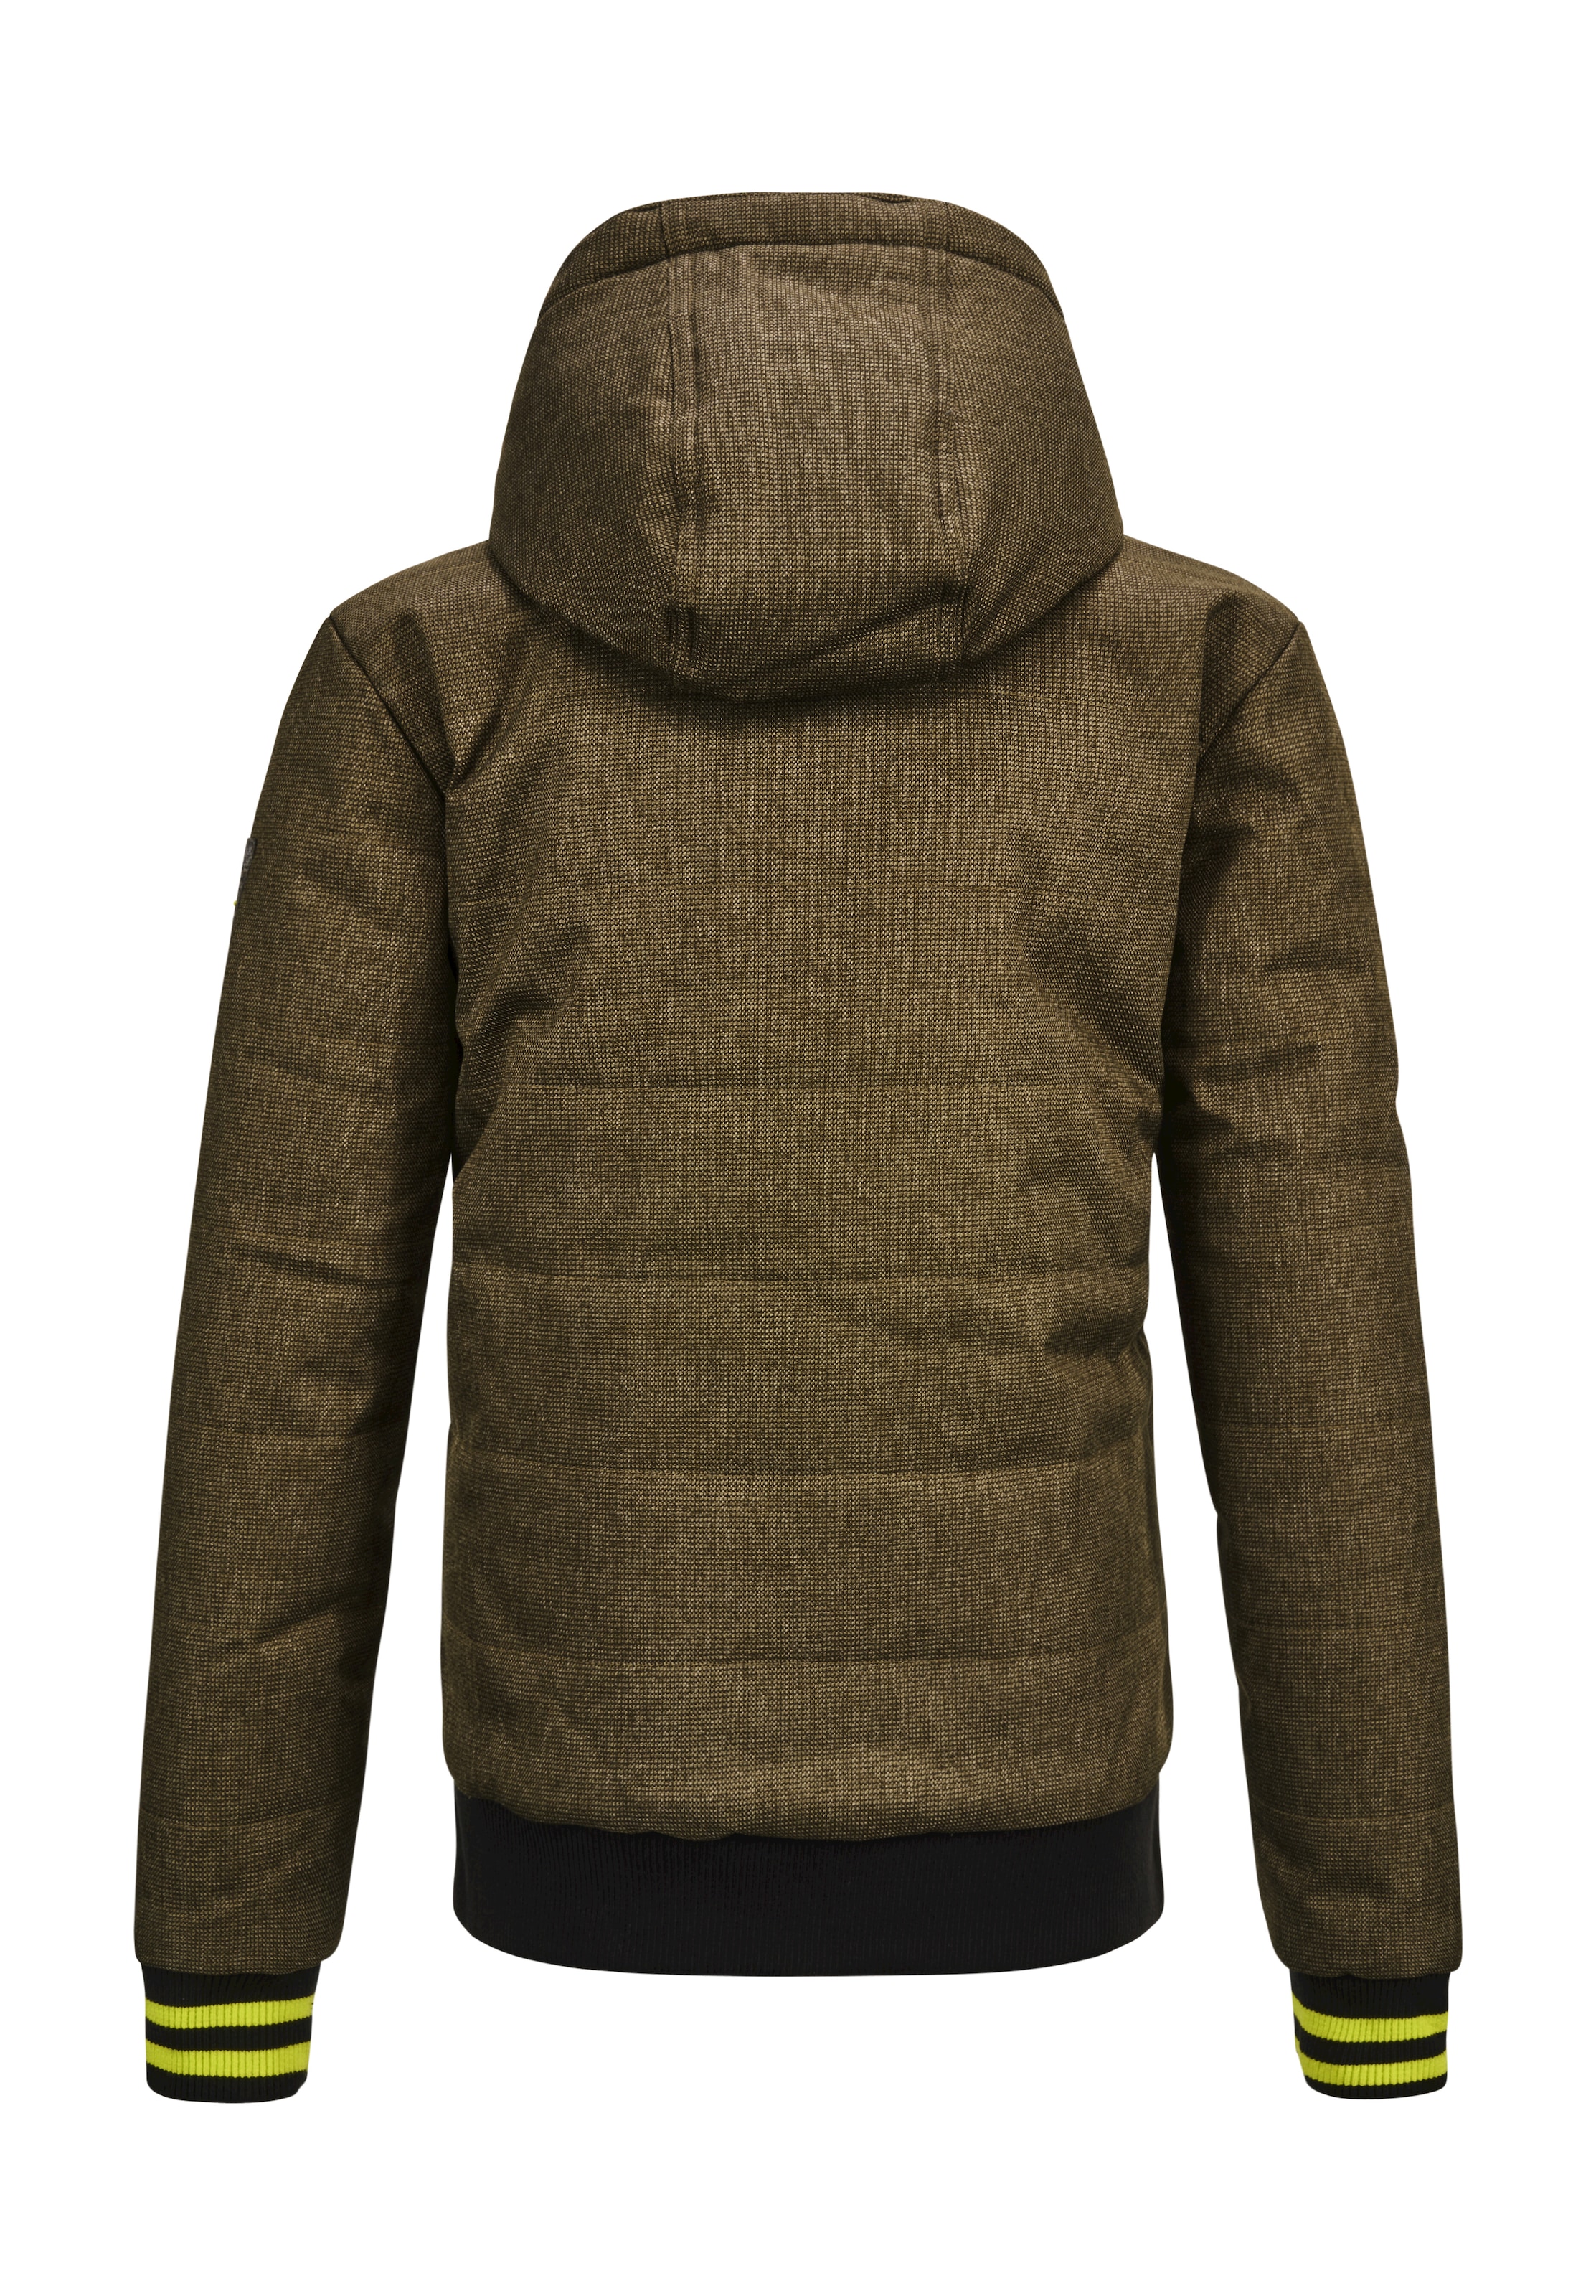 BYS Killtec BLSN »Bantry A« Funktionsjacke bei ♕ Quilted